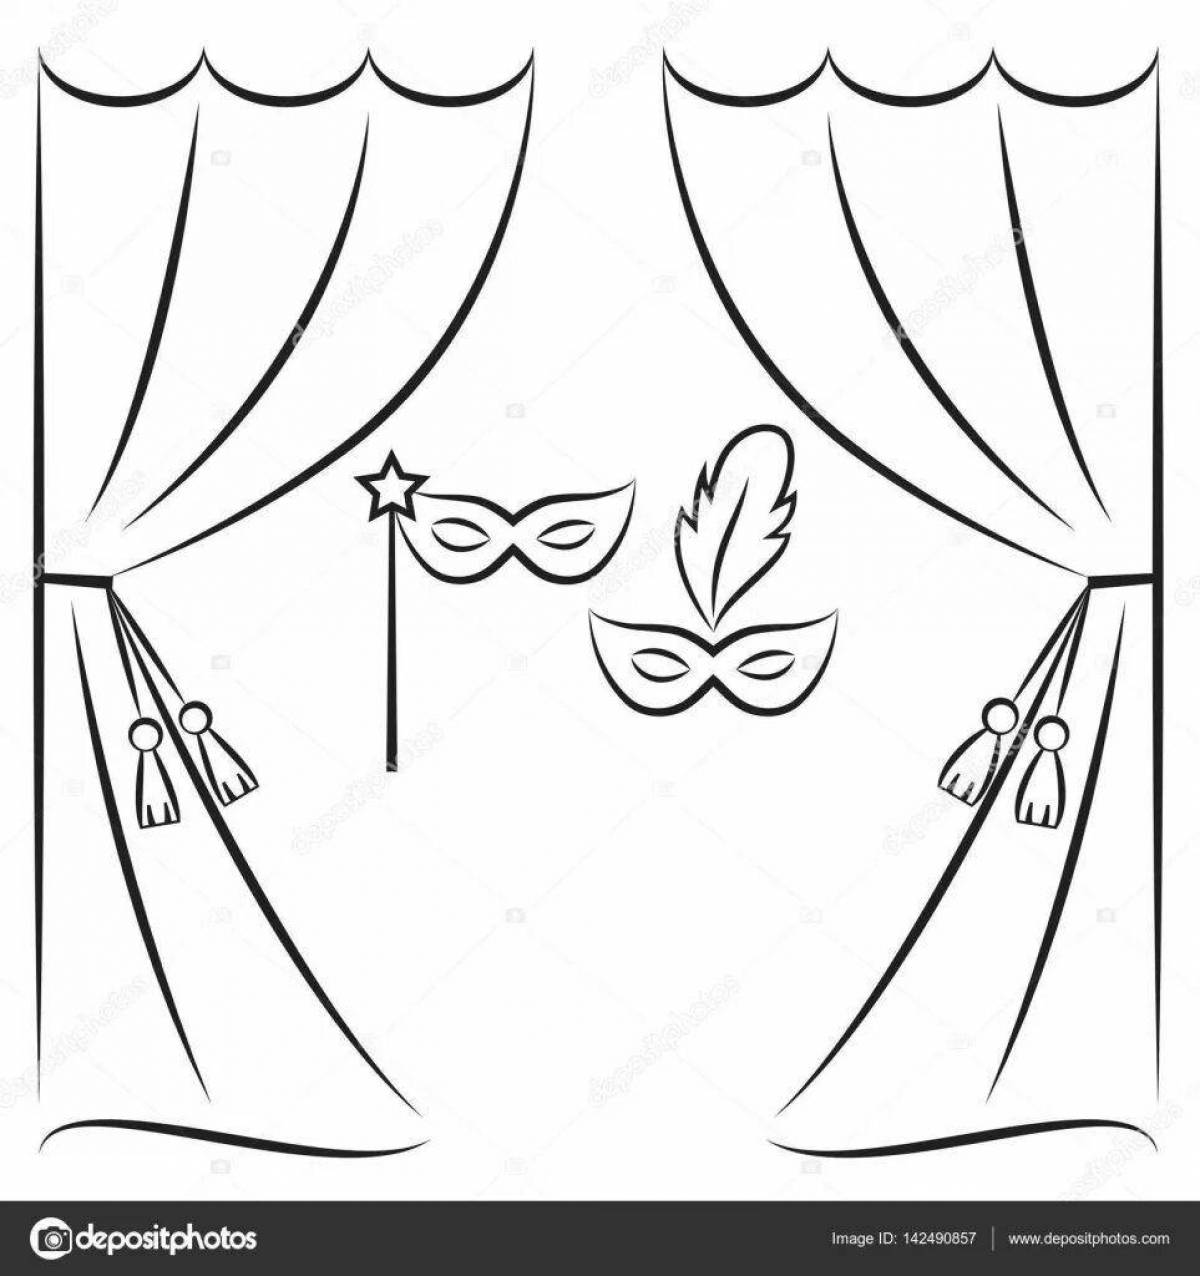 Adorable theater curtain coloring page